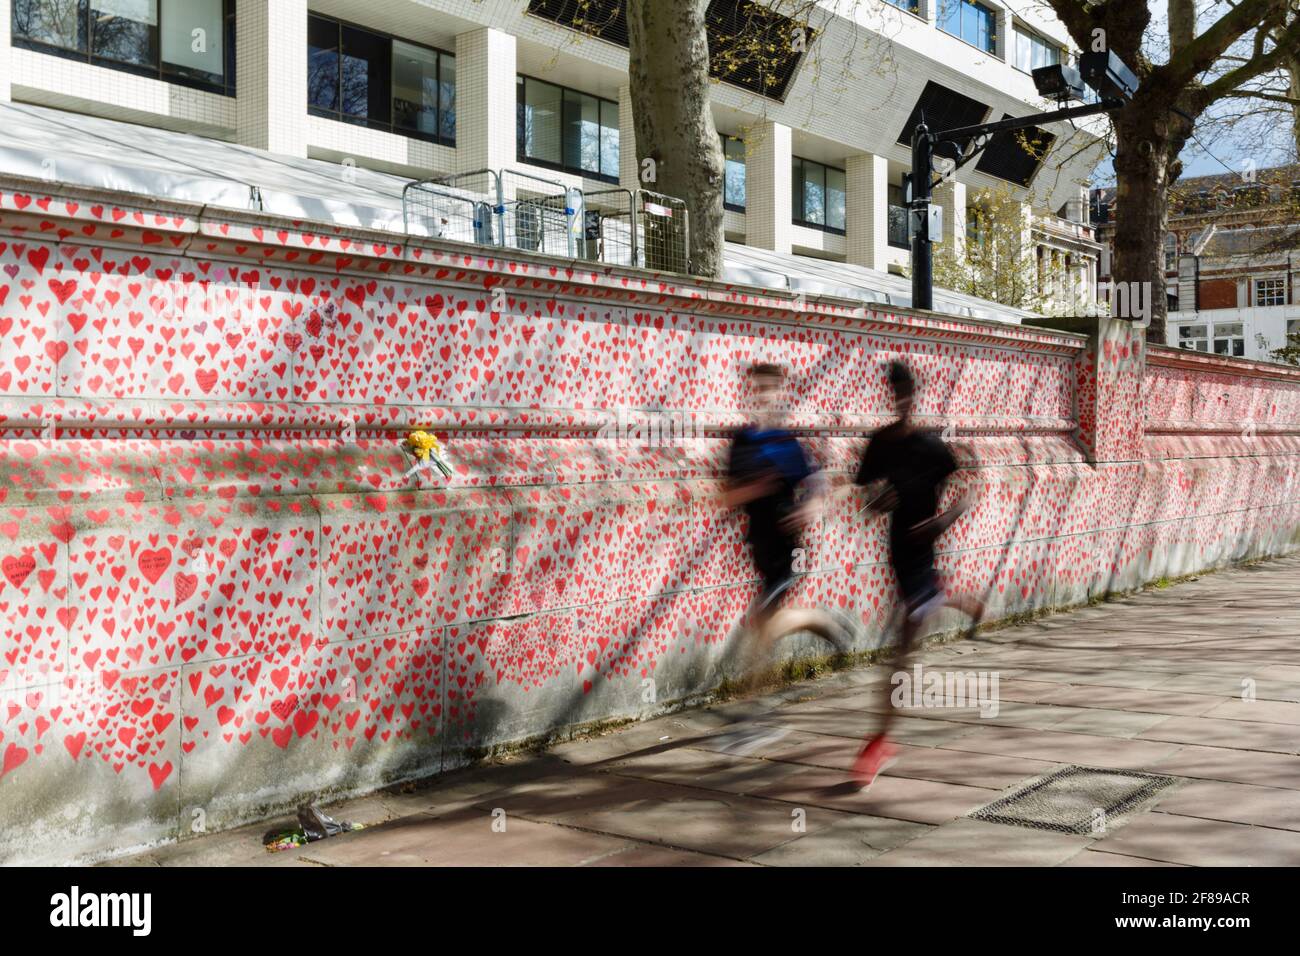 Red hearts painted on the National Covid Memorial Wall as a tribute to the British victims of the Coronavirus pandemic Stock Photo